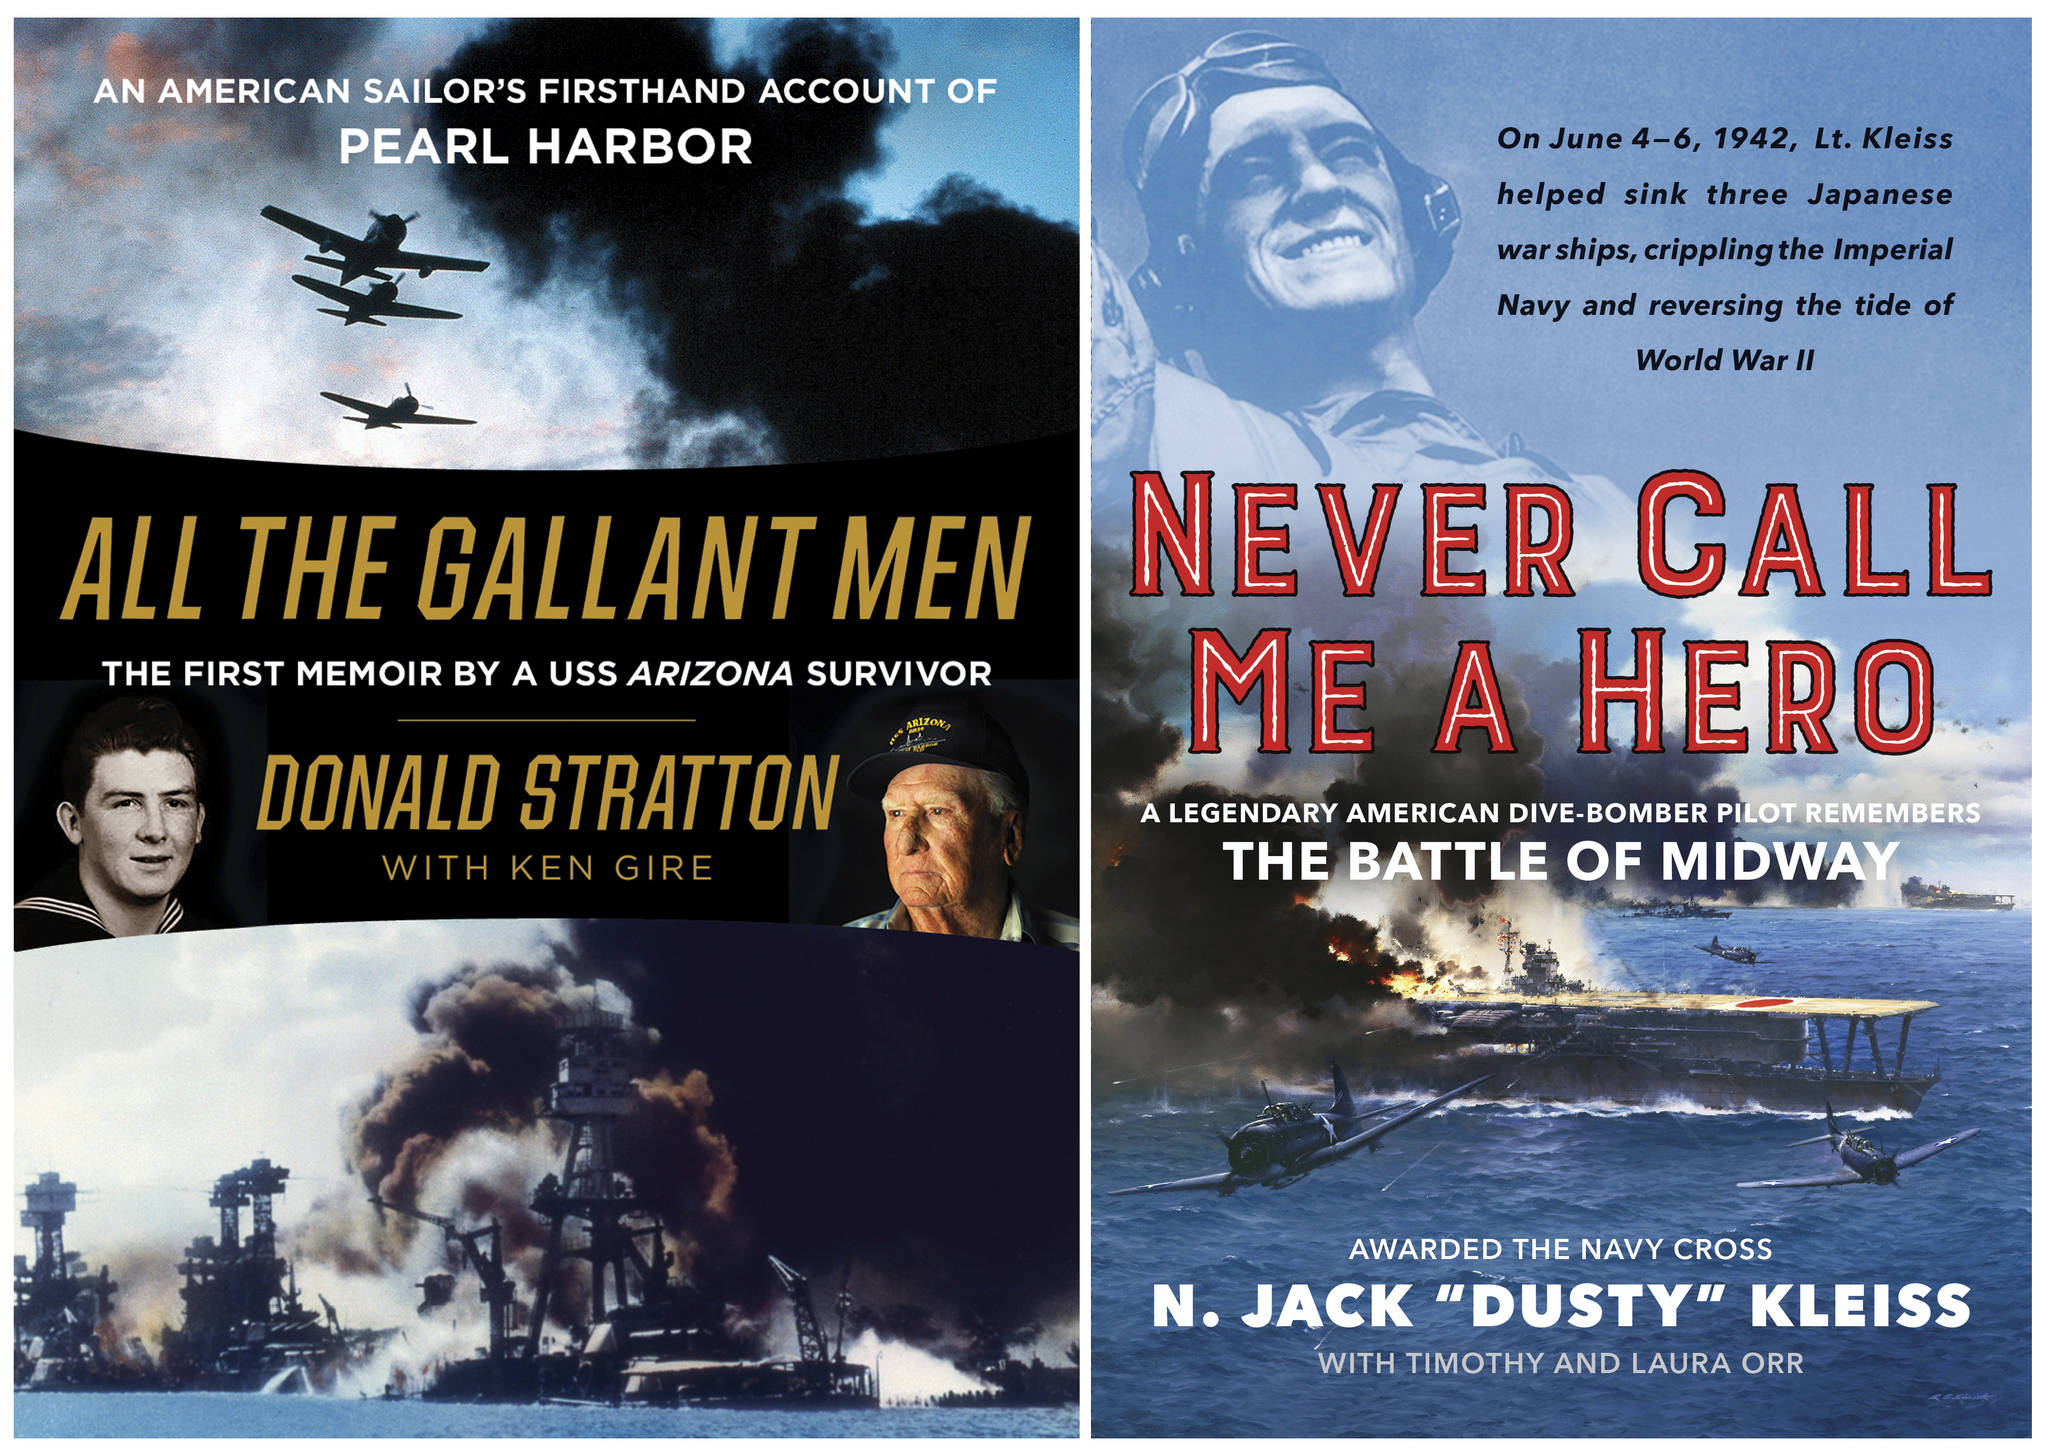 This combination photo of images released by William Morrow show “All the Gallant Men: An American Sailor’s Firsthand Account of Pearl Harbor,” by Donald Stratton with Ken Gire, left, and “Never Call Me a Hero: A Legendary American Dive-Bomber Pilot Remembers the Battle of Midway,” by N. Jack “Dusty” Kleiss and Timothy Orr. (William Morrow via AP)